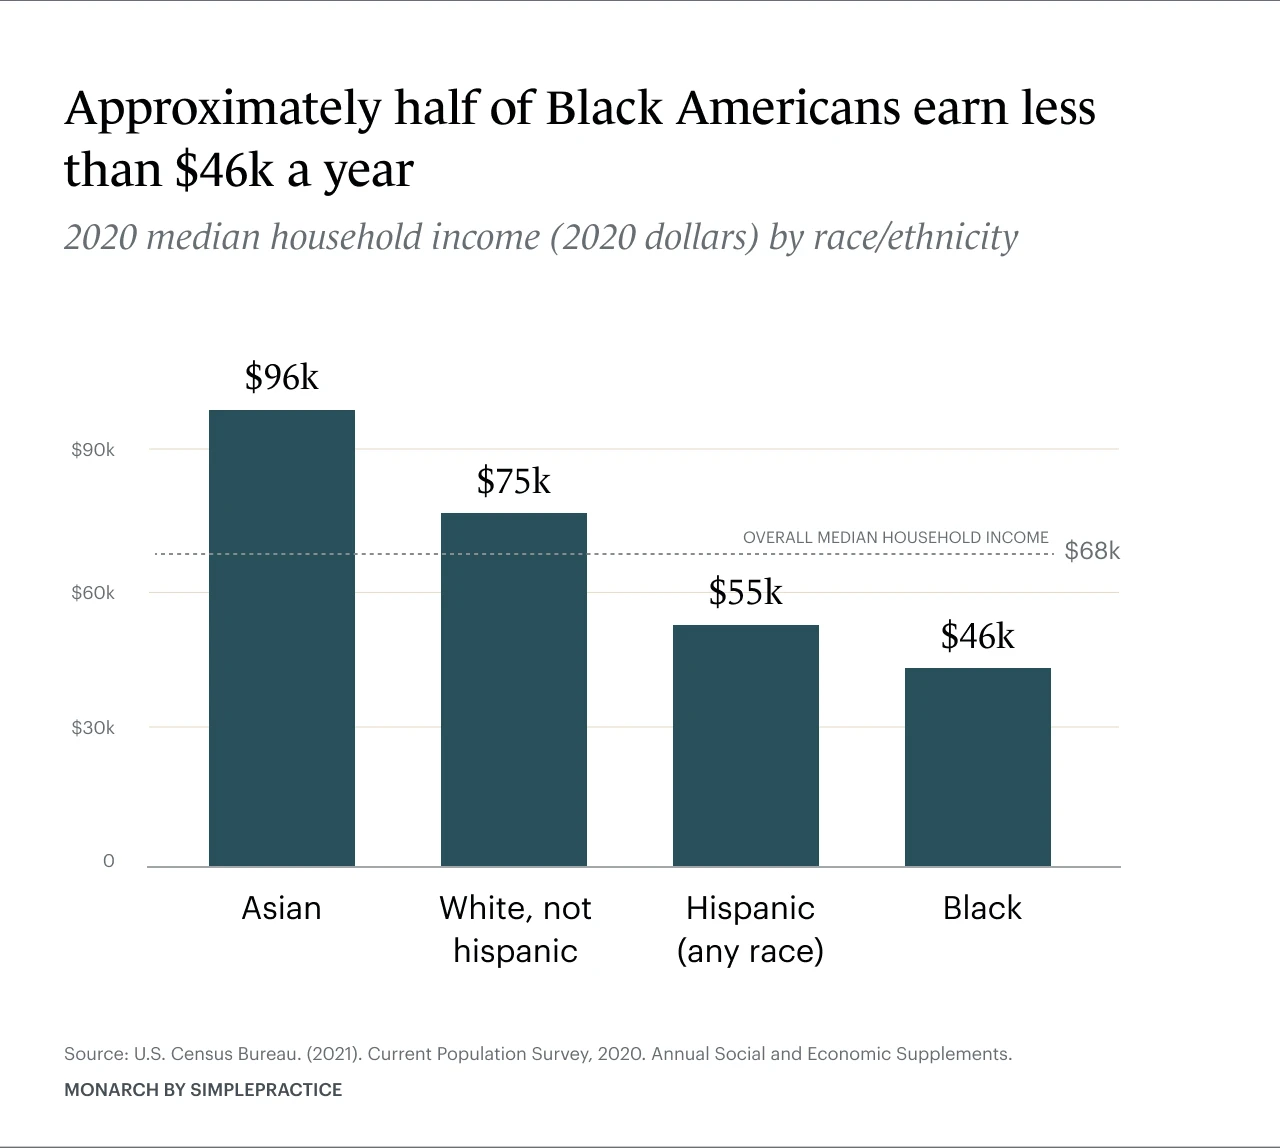 2020 median household income (2020 dollars) by race/ethnicity